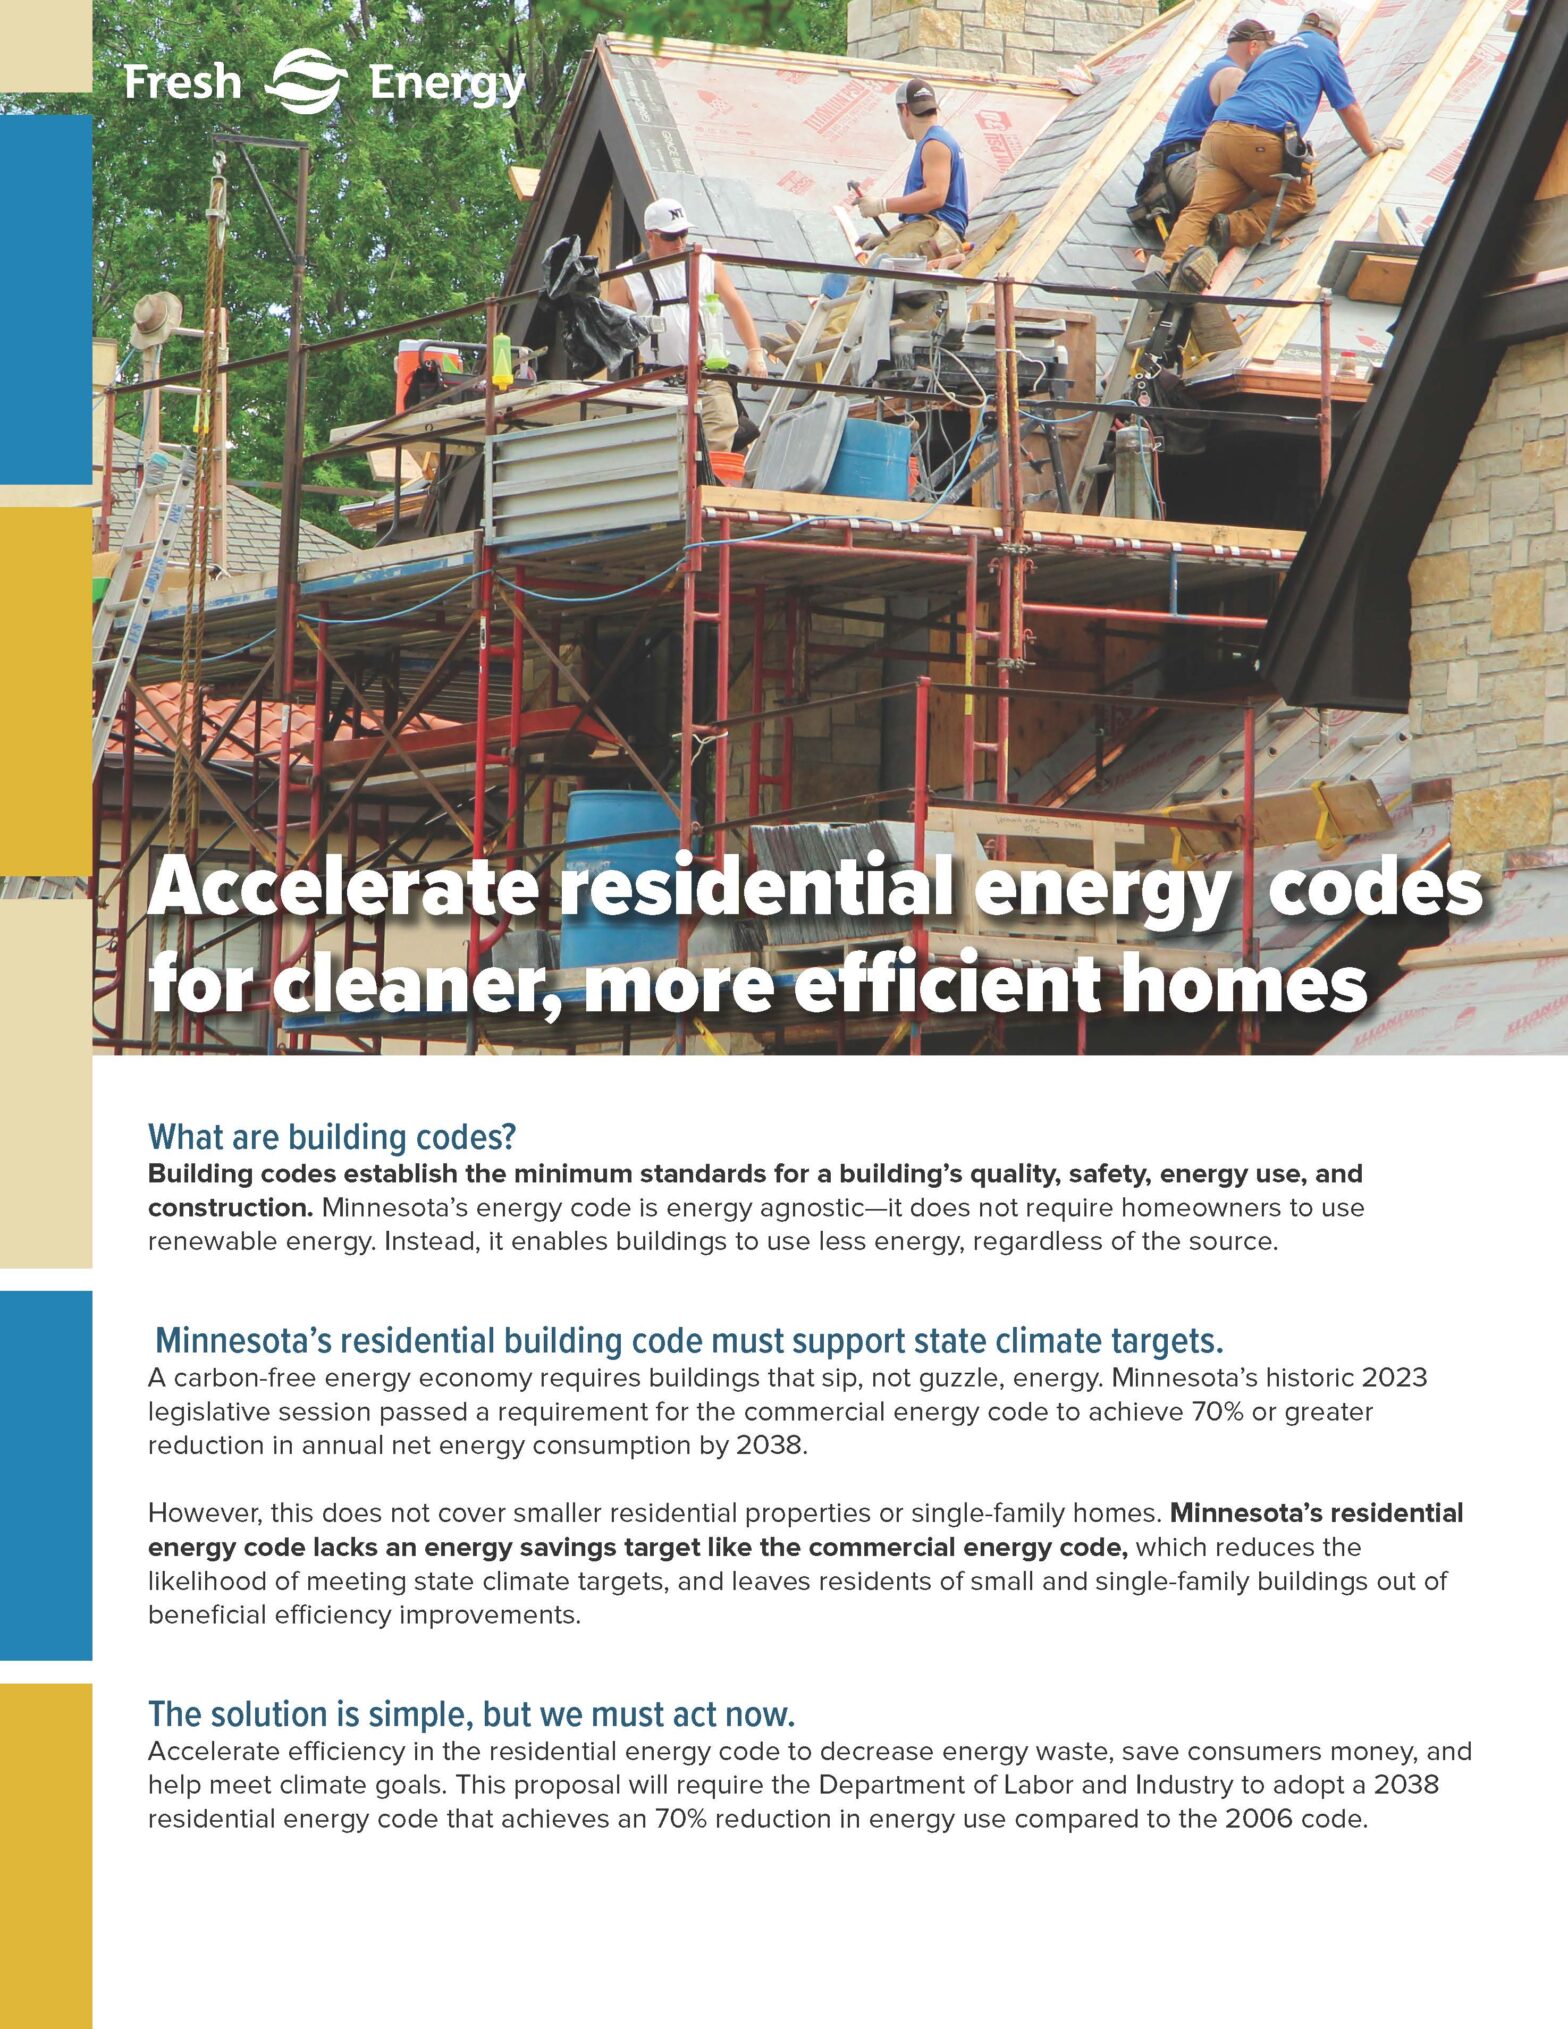 Fact Sheet: Accelerate residential energy codes